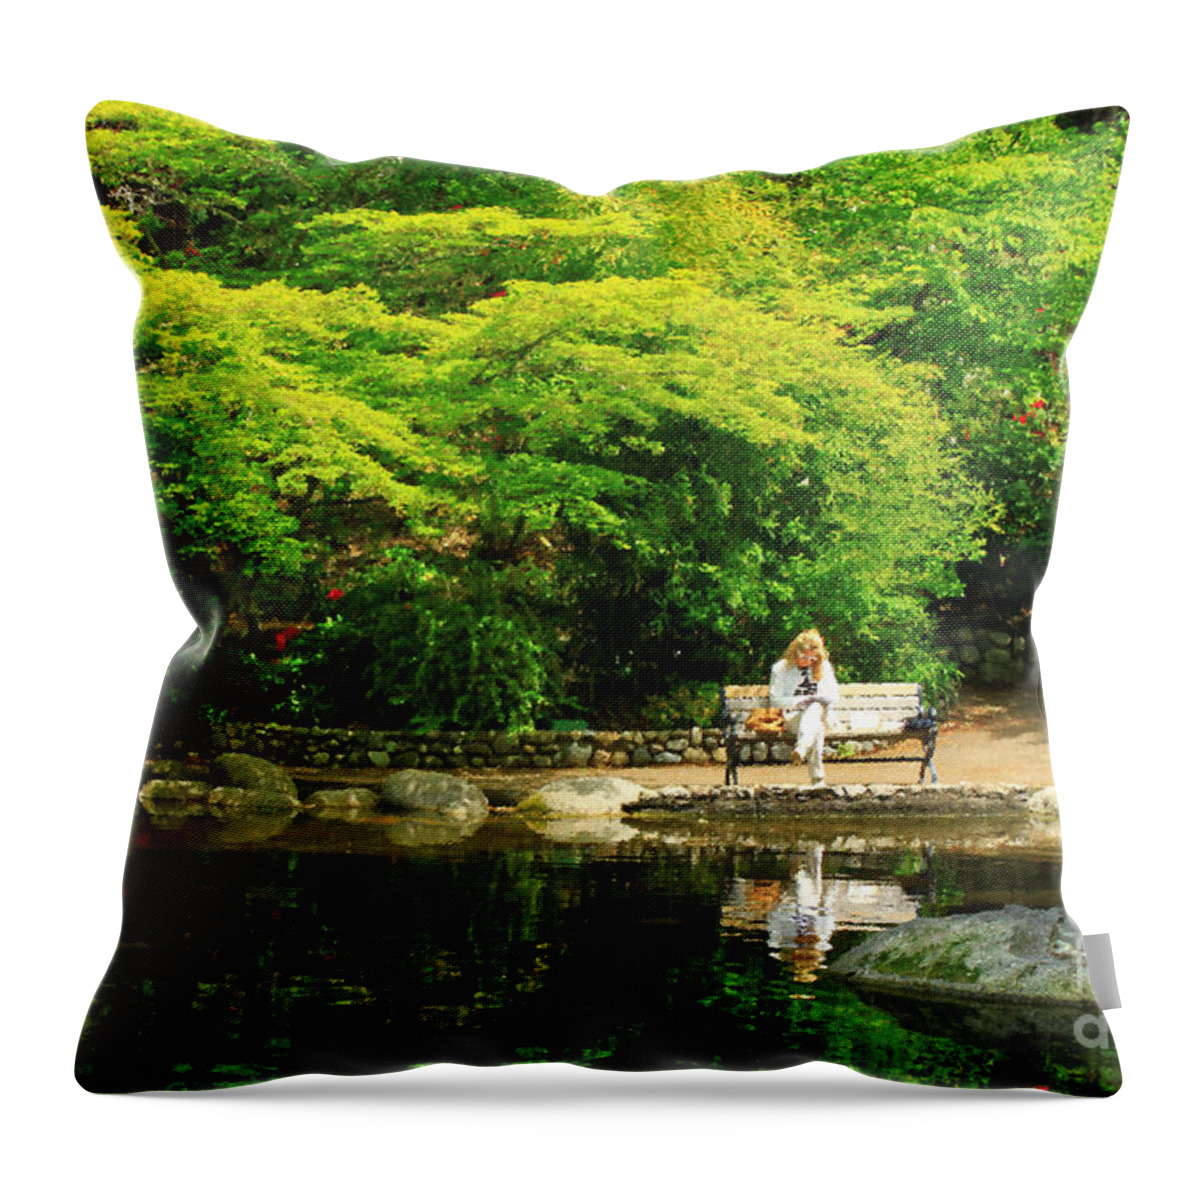 Pond Throw Pillow featuring the photograph Reading At The Pond by James Eddy